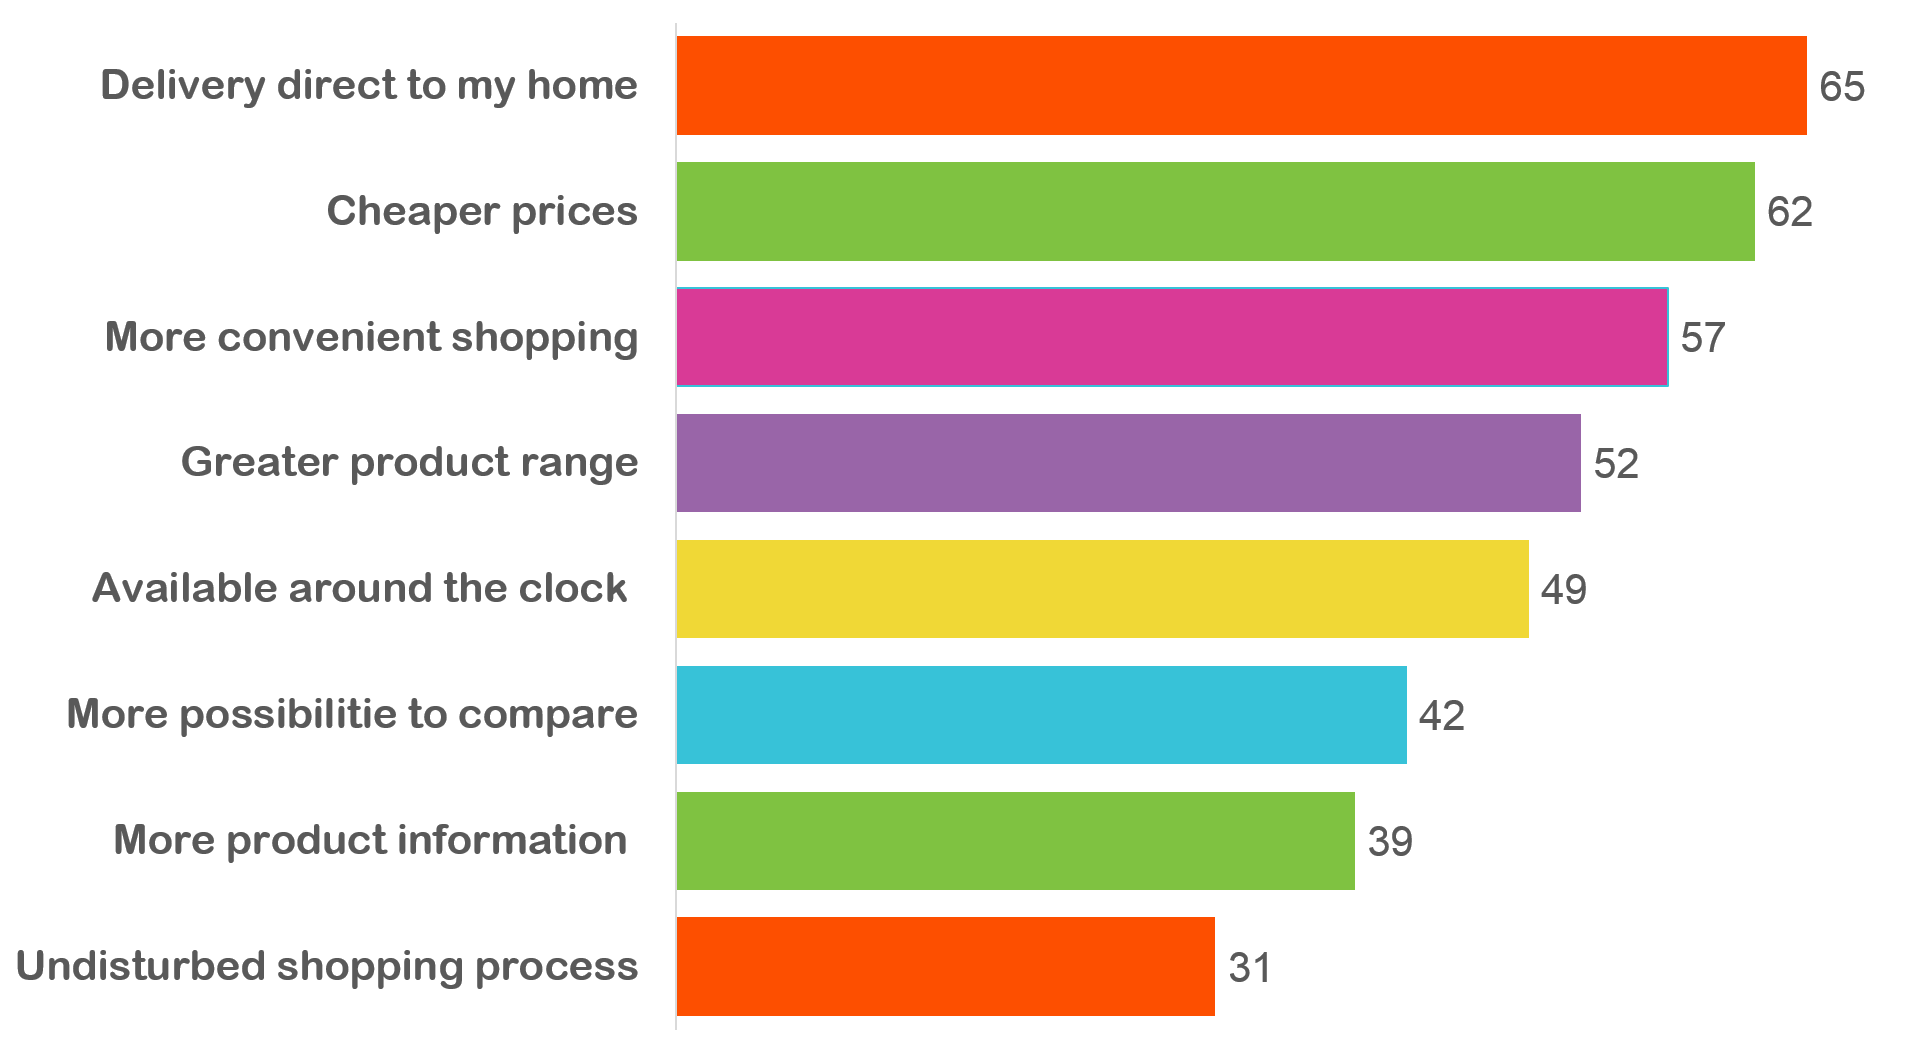 Reasons for change in shopping to online - Parcel Tracking.png